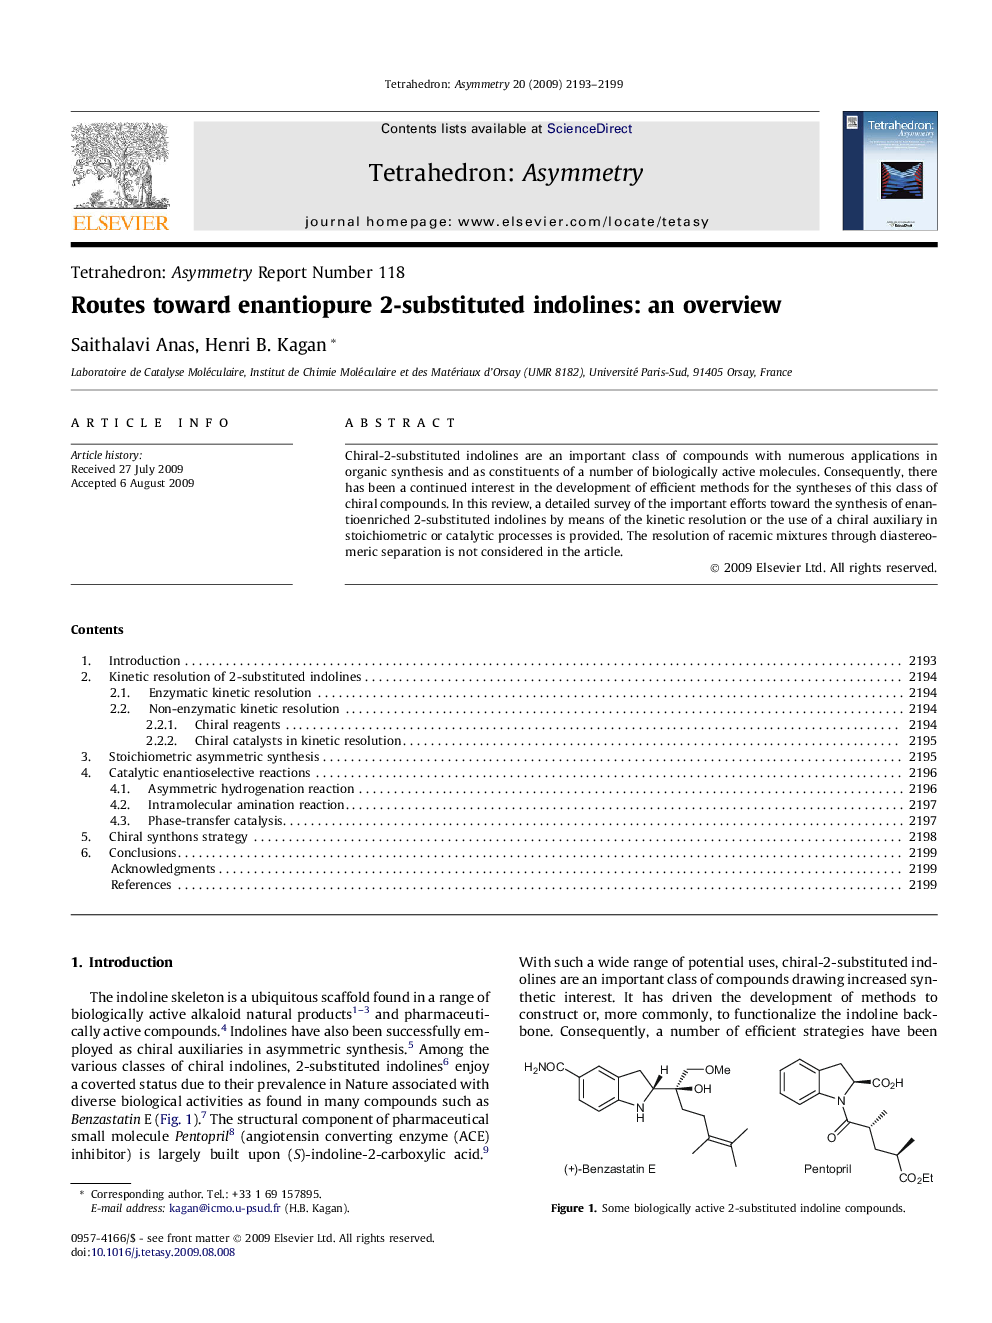 Routes toward enantiopure 2-substituted indolines: an overview